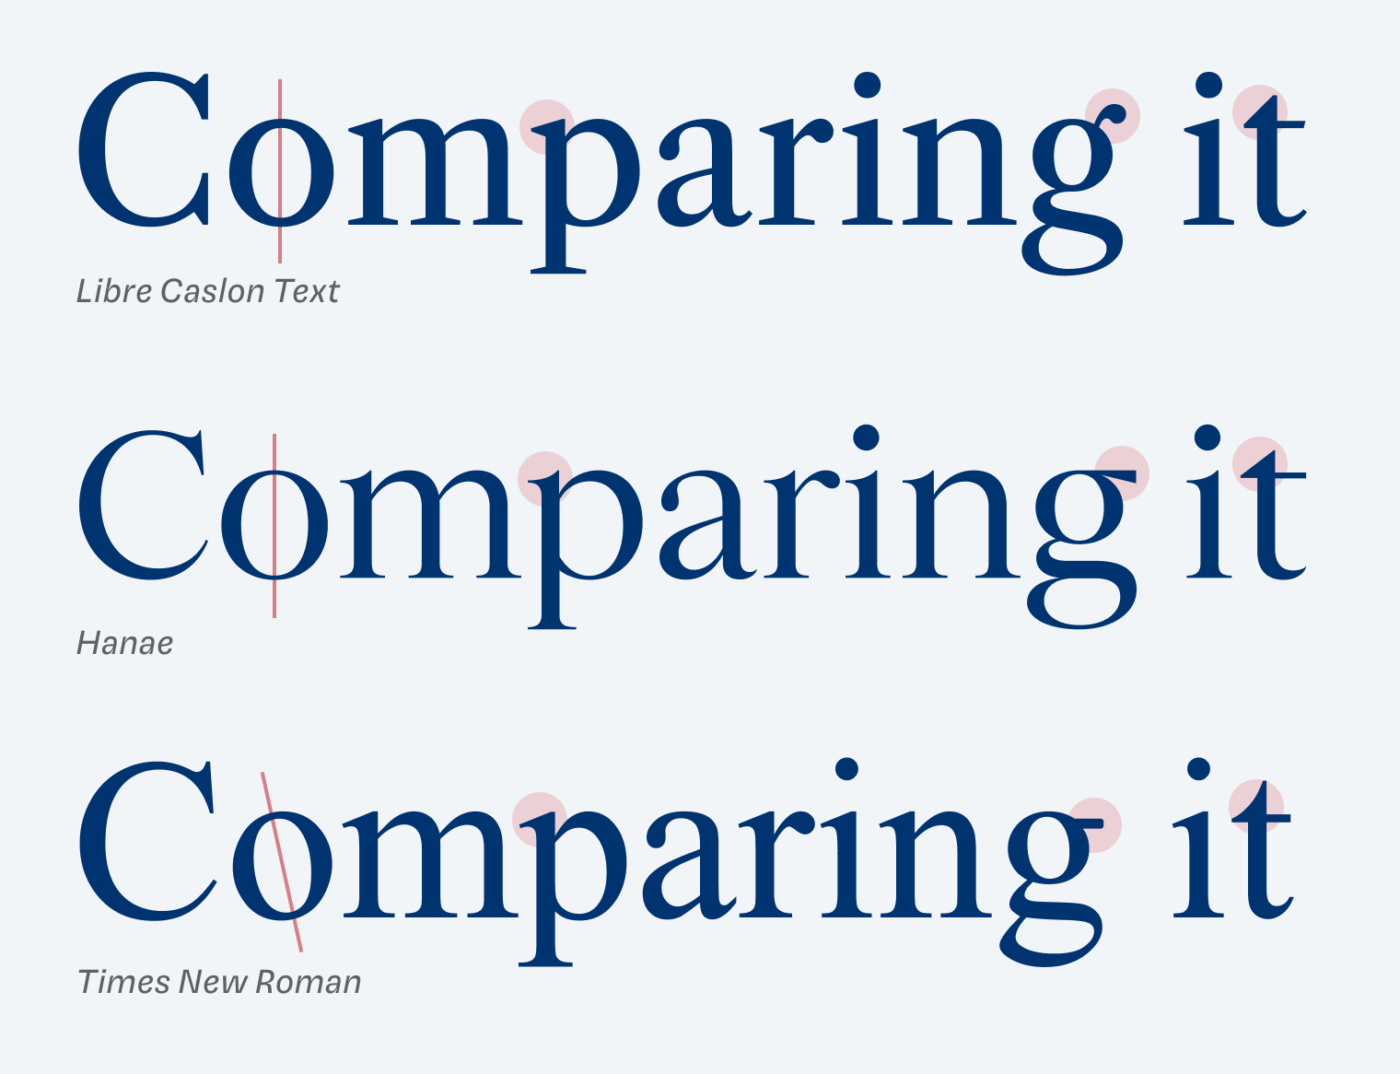 Comparing Hanae it with Libre Caslon Text and Times New Roman